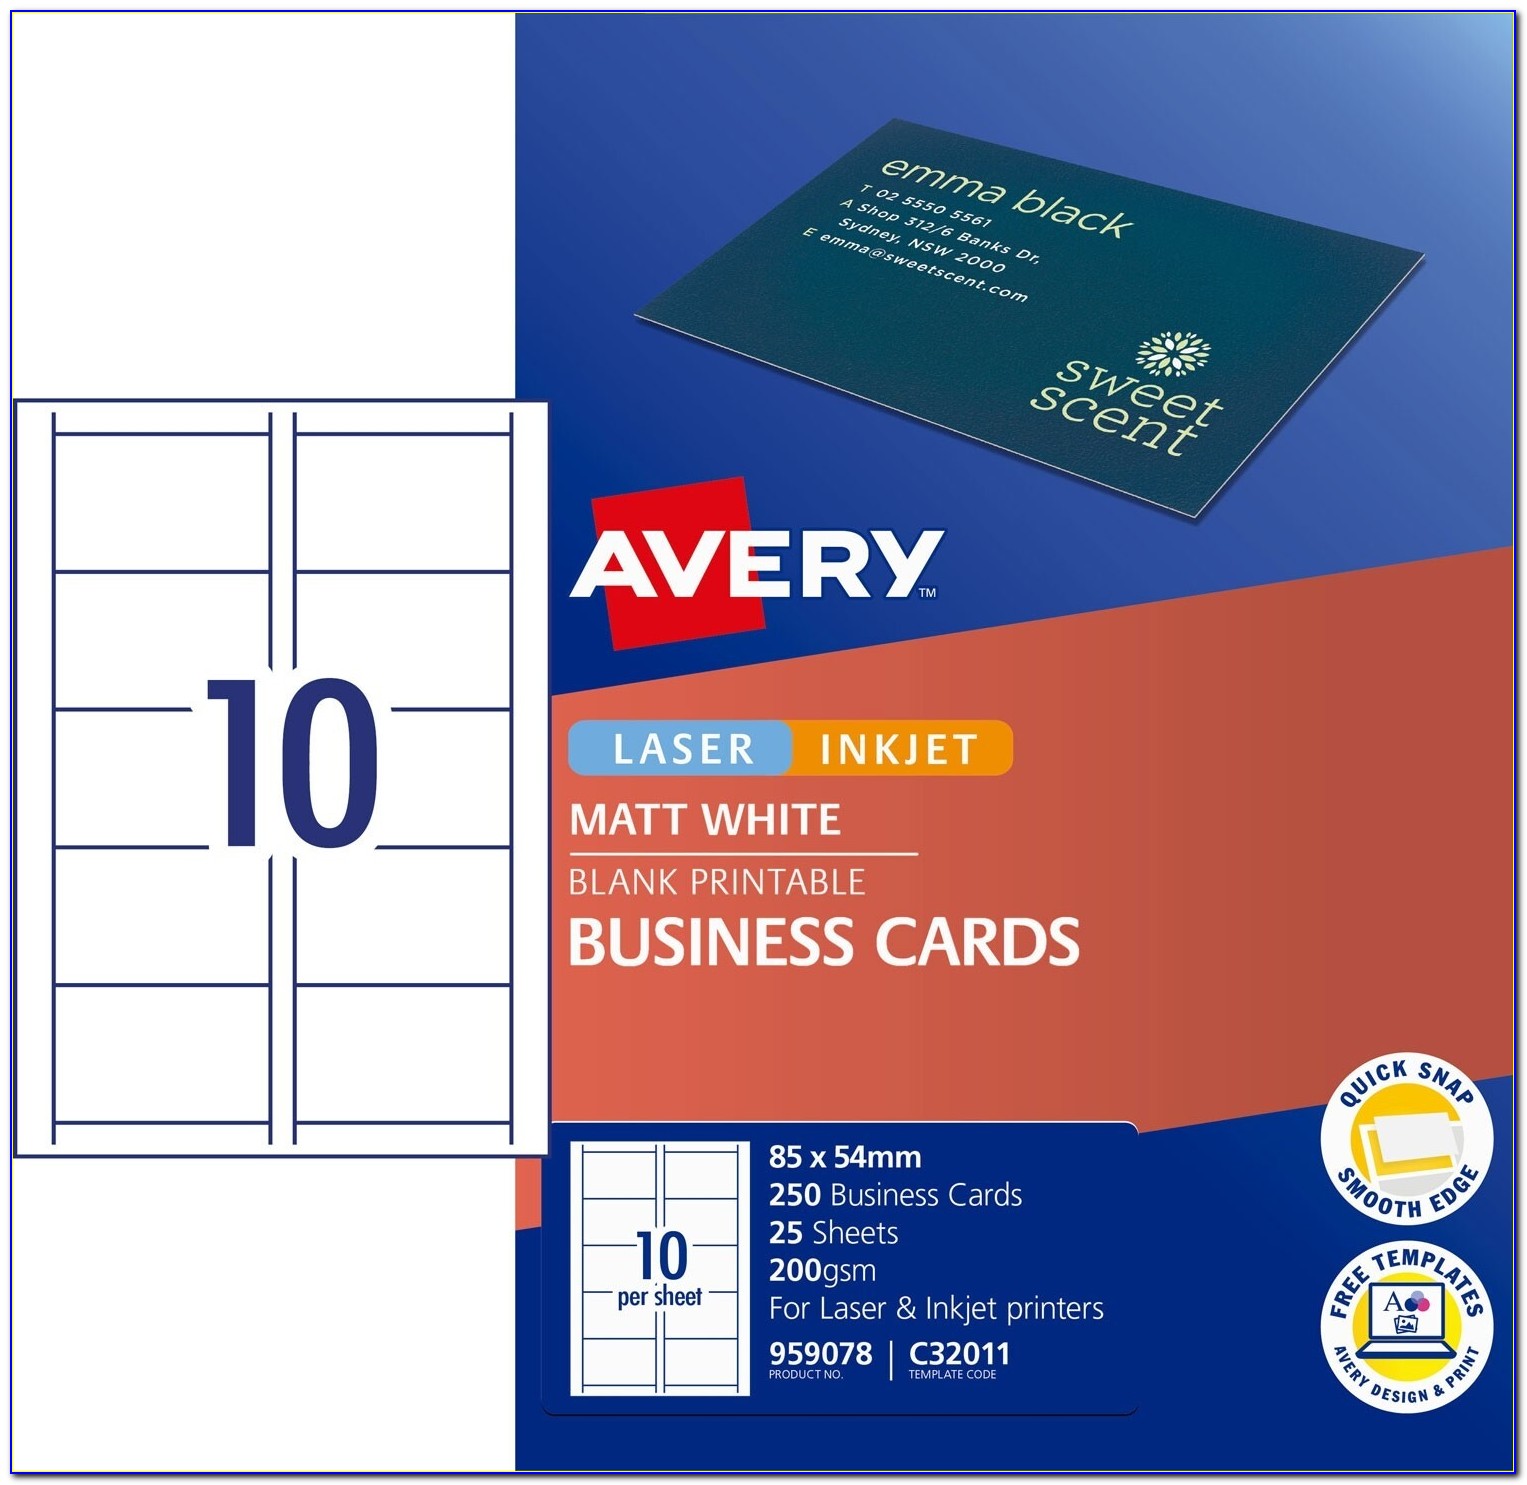 Print Avery Business Cards In Word